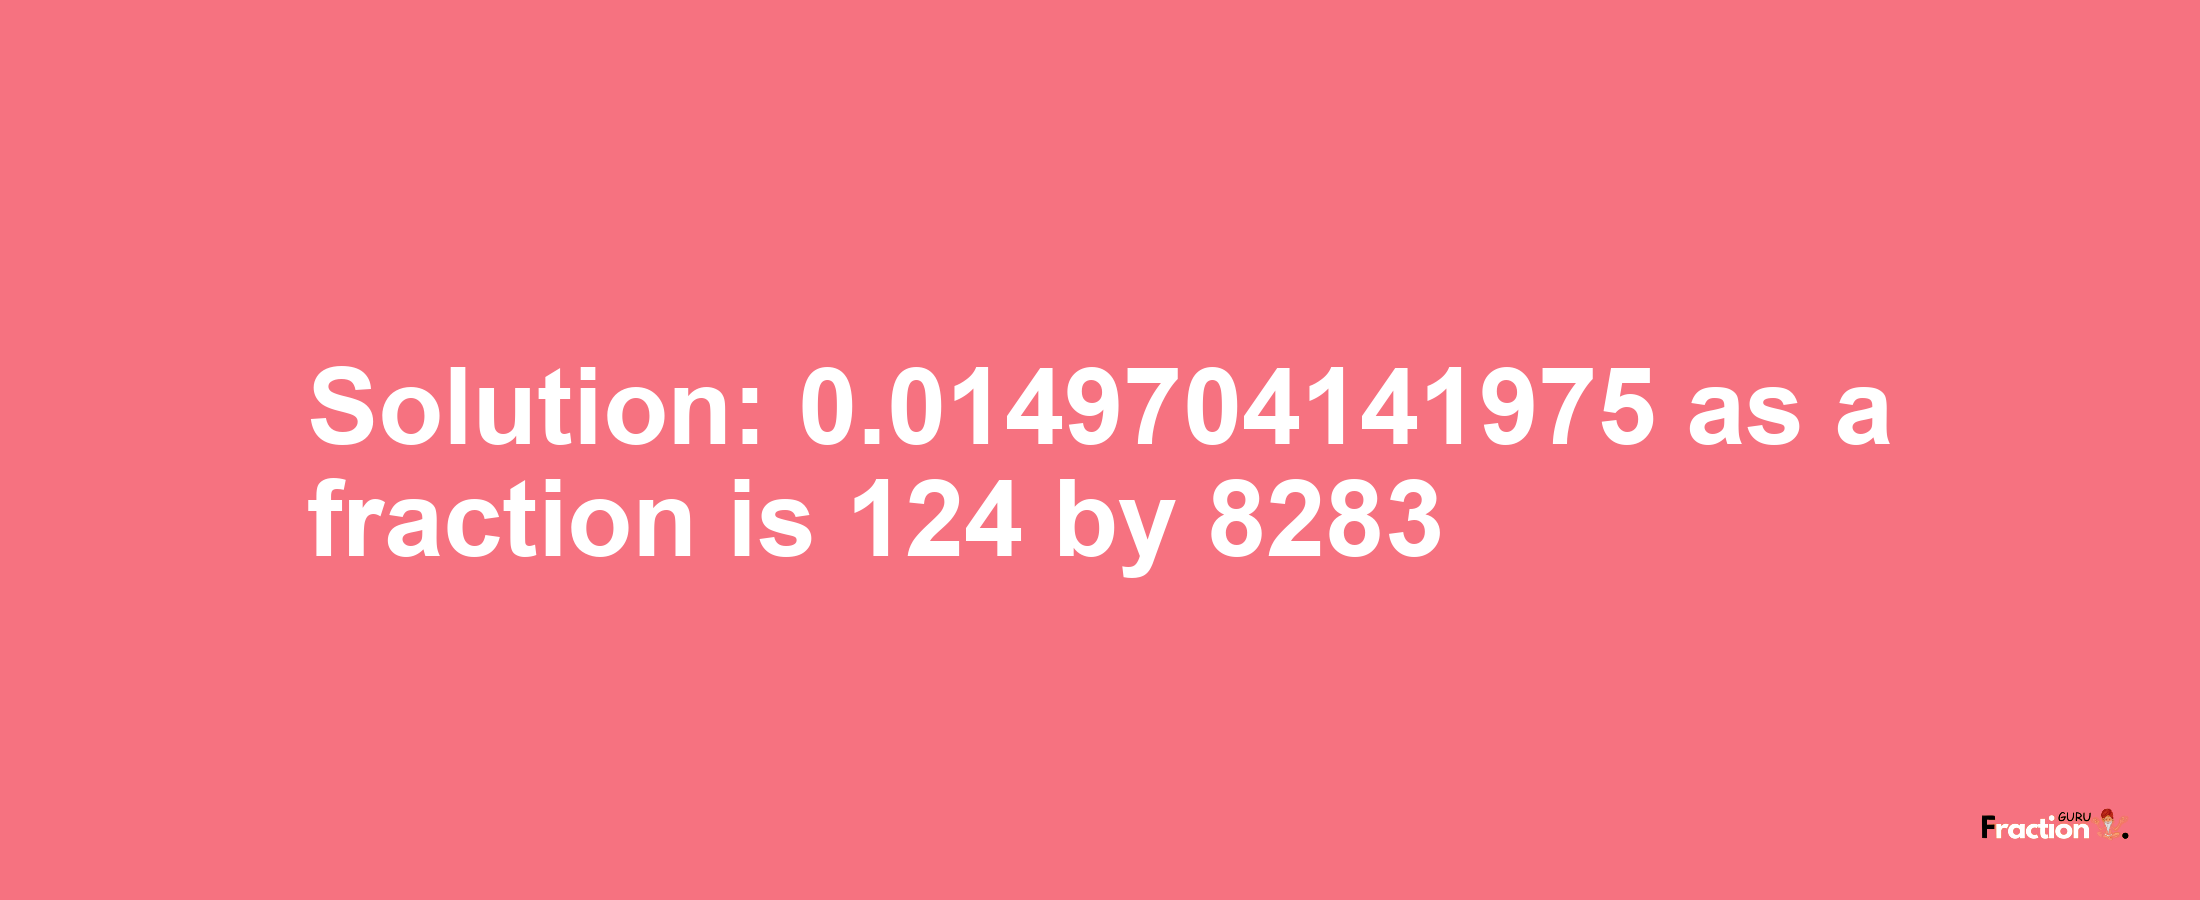 Solution:0.0149704141975 as a fraction is 124/8283